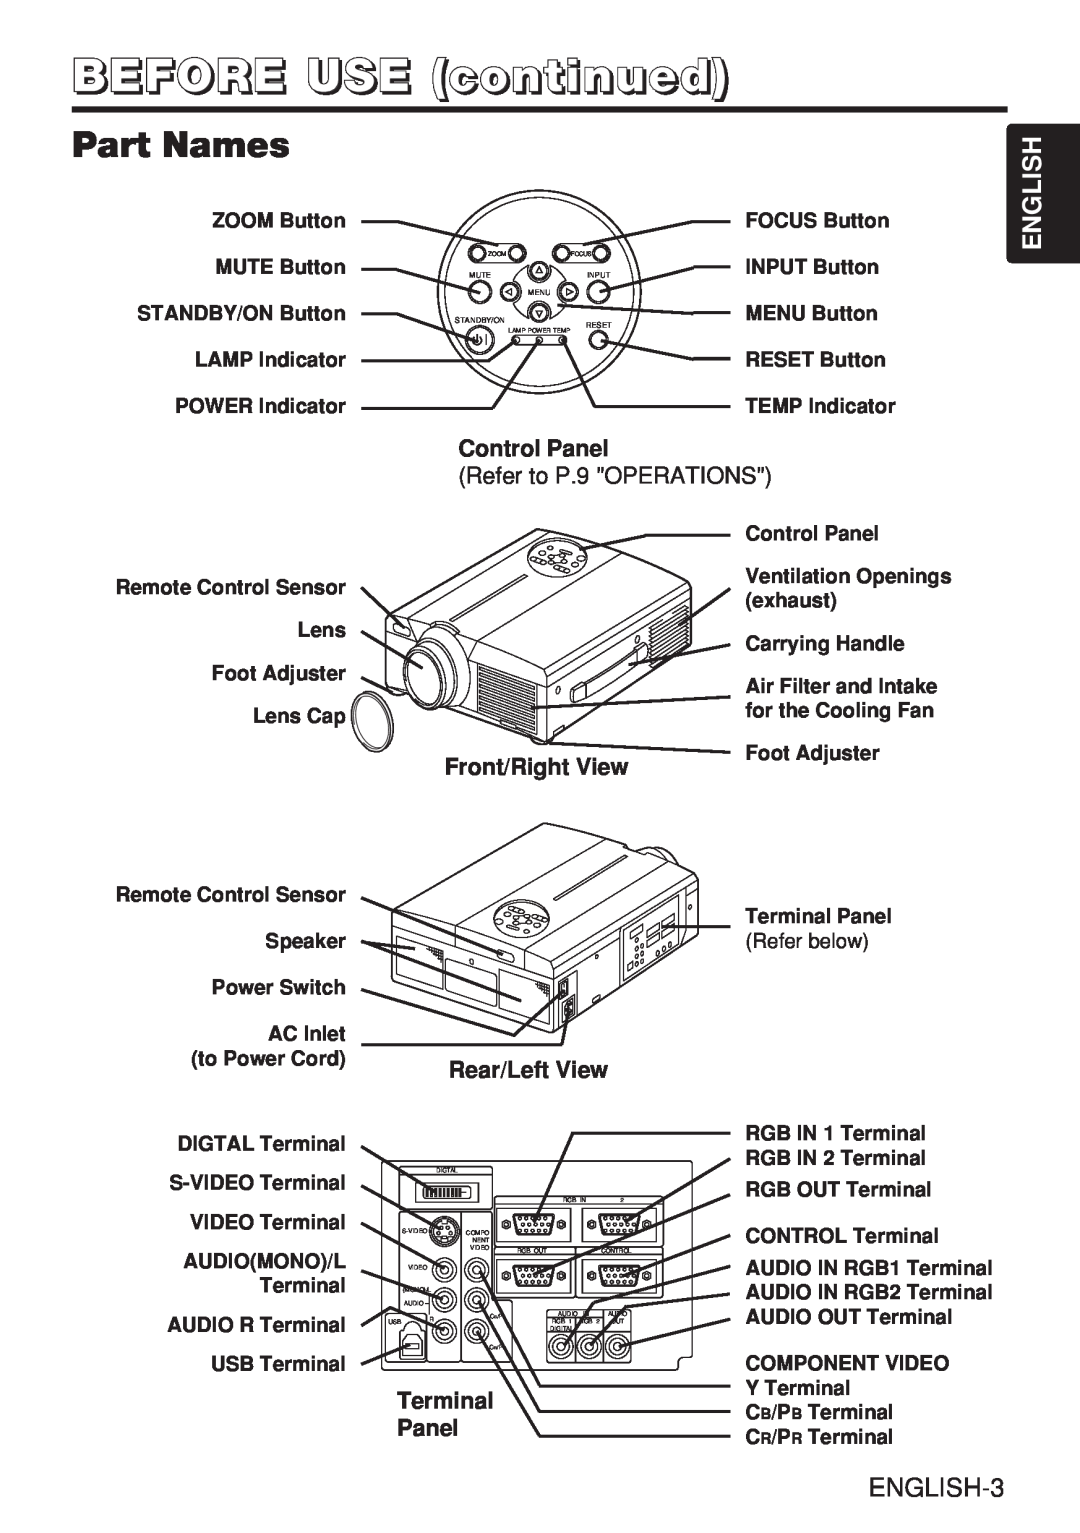 Hitachi CP-X985W user manual BEFORE USE continued, Part Names, English 